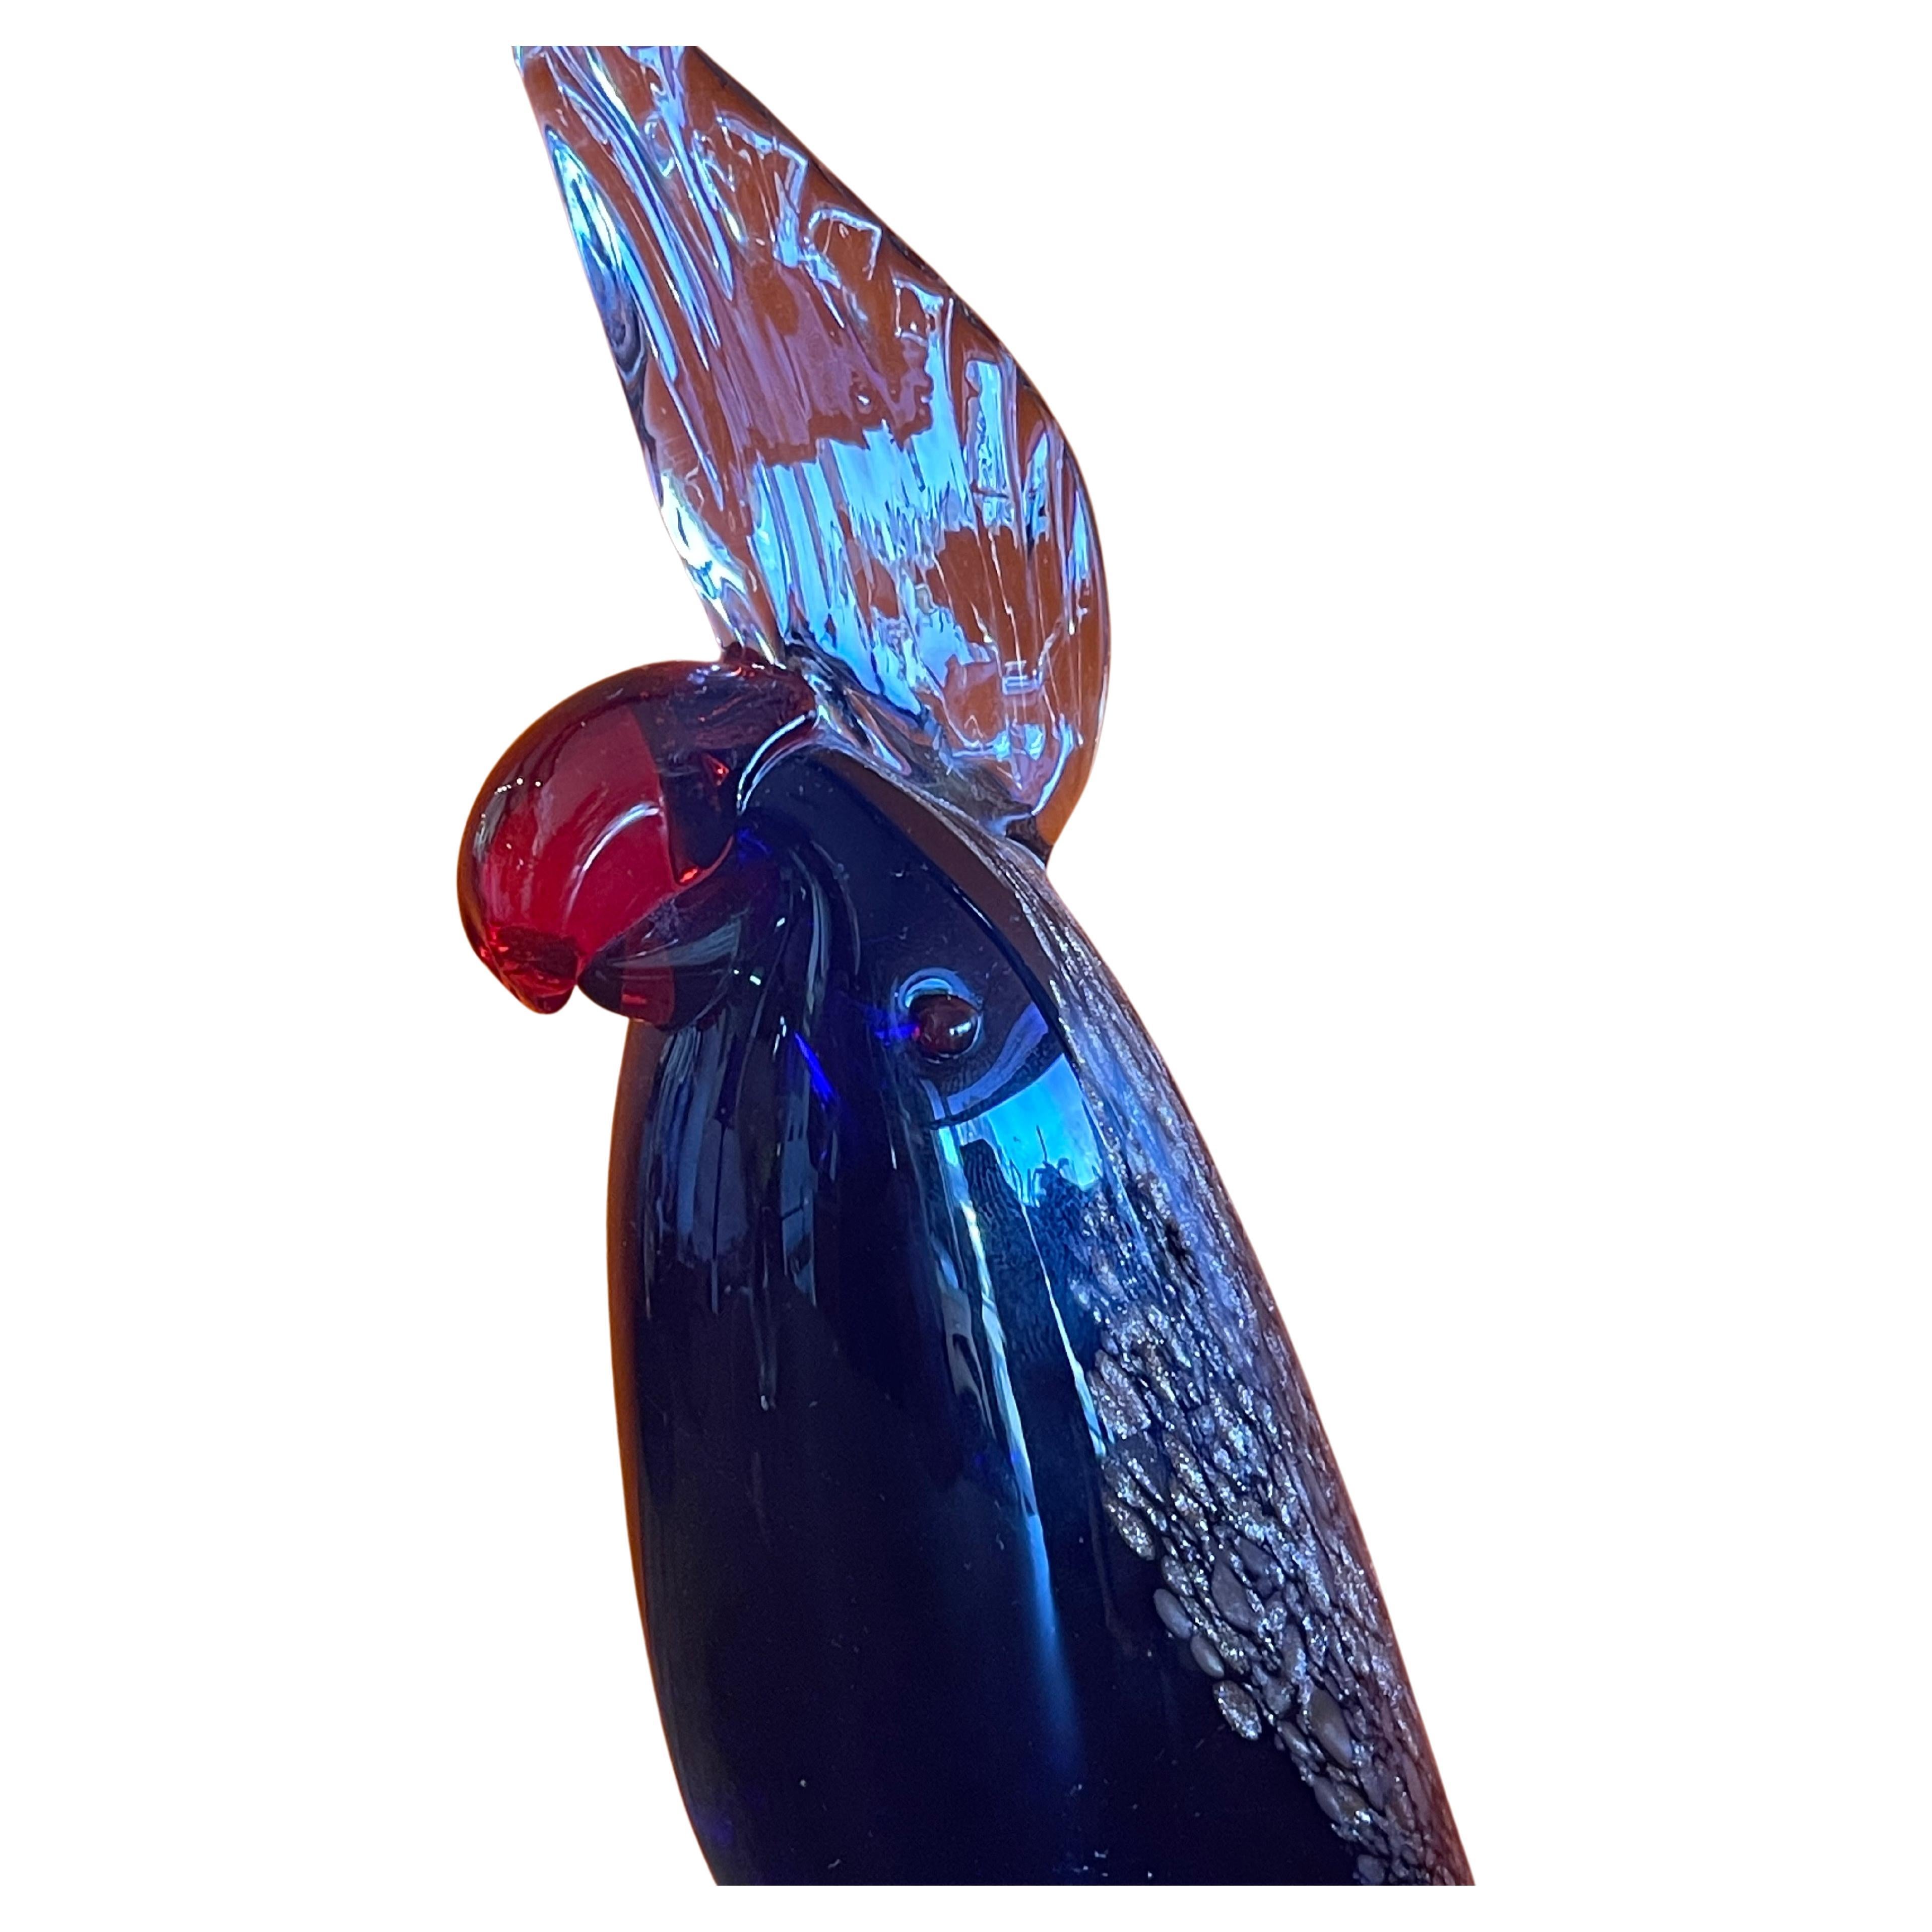 Stylish cockatoo art glass sculpture by Murano Glass, circa 1960s. The piece is in very good vintage condition with no chips or cracks and measures 4